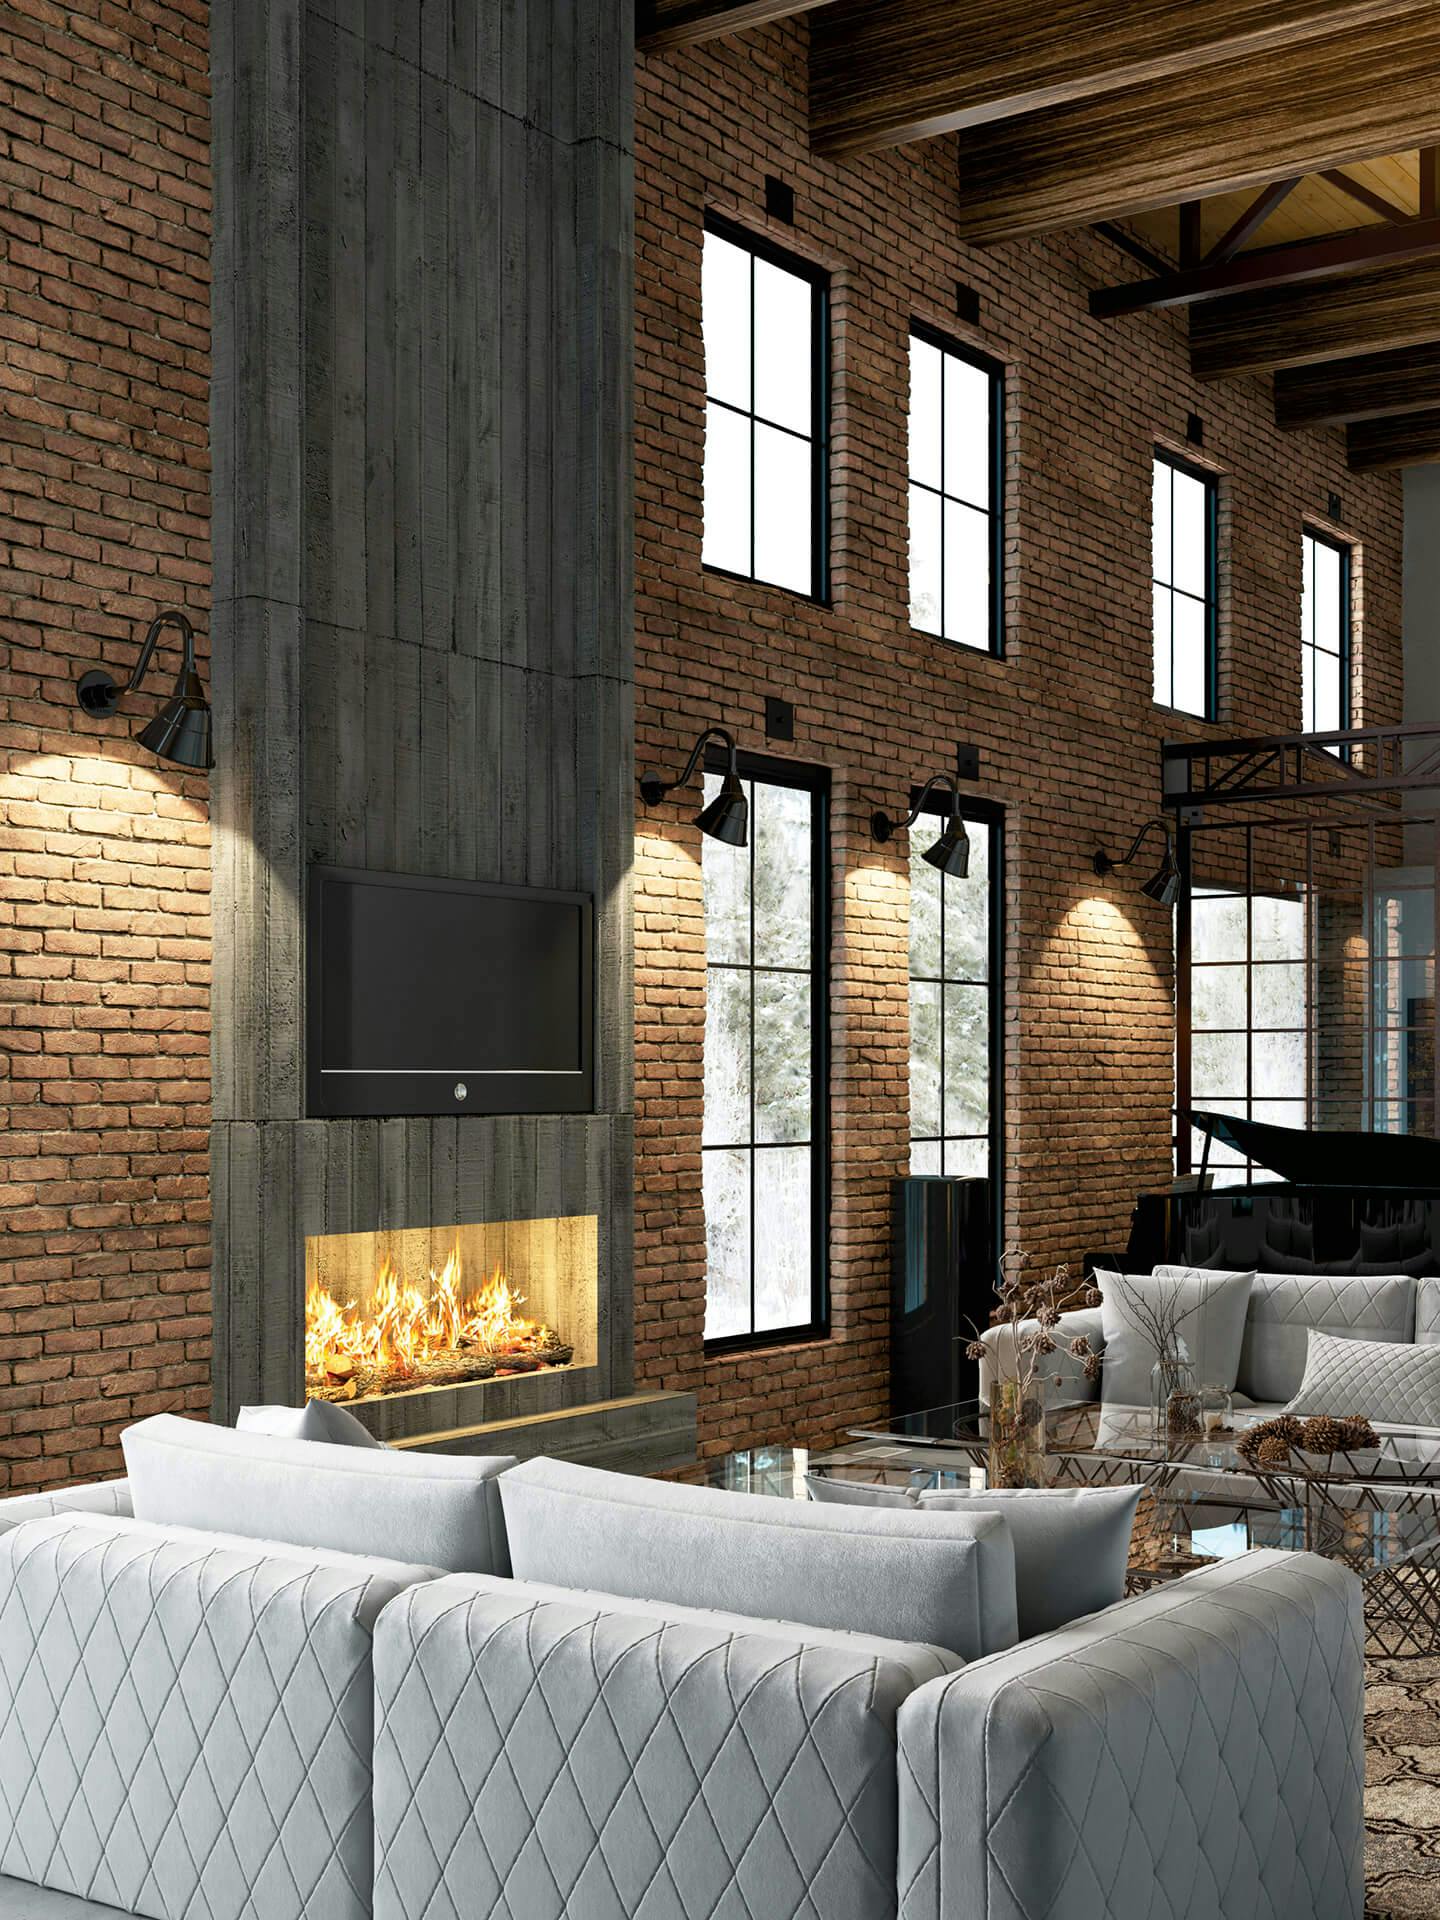 Industrial loft living room with two story tall ceiling, brick wall and fire place